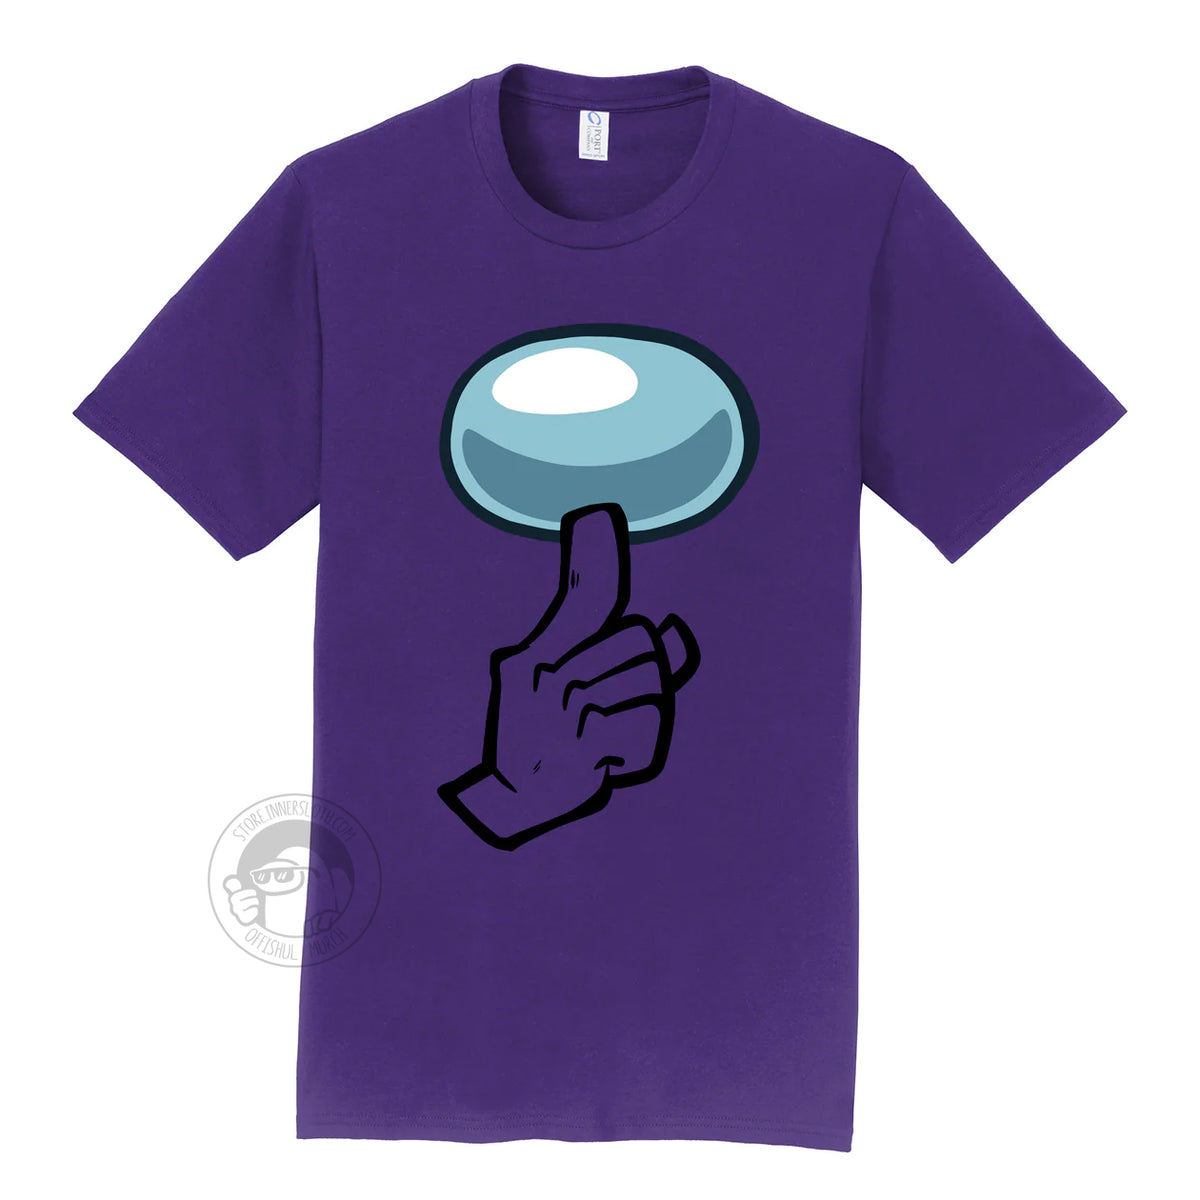 A product photograph of the Among Us: Shhhirt t-shirt in purple. The art on the shirt shows the crewmate visor and a hand with one finger pointing up in a “shh”ing pose. 